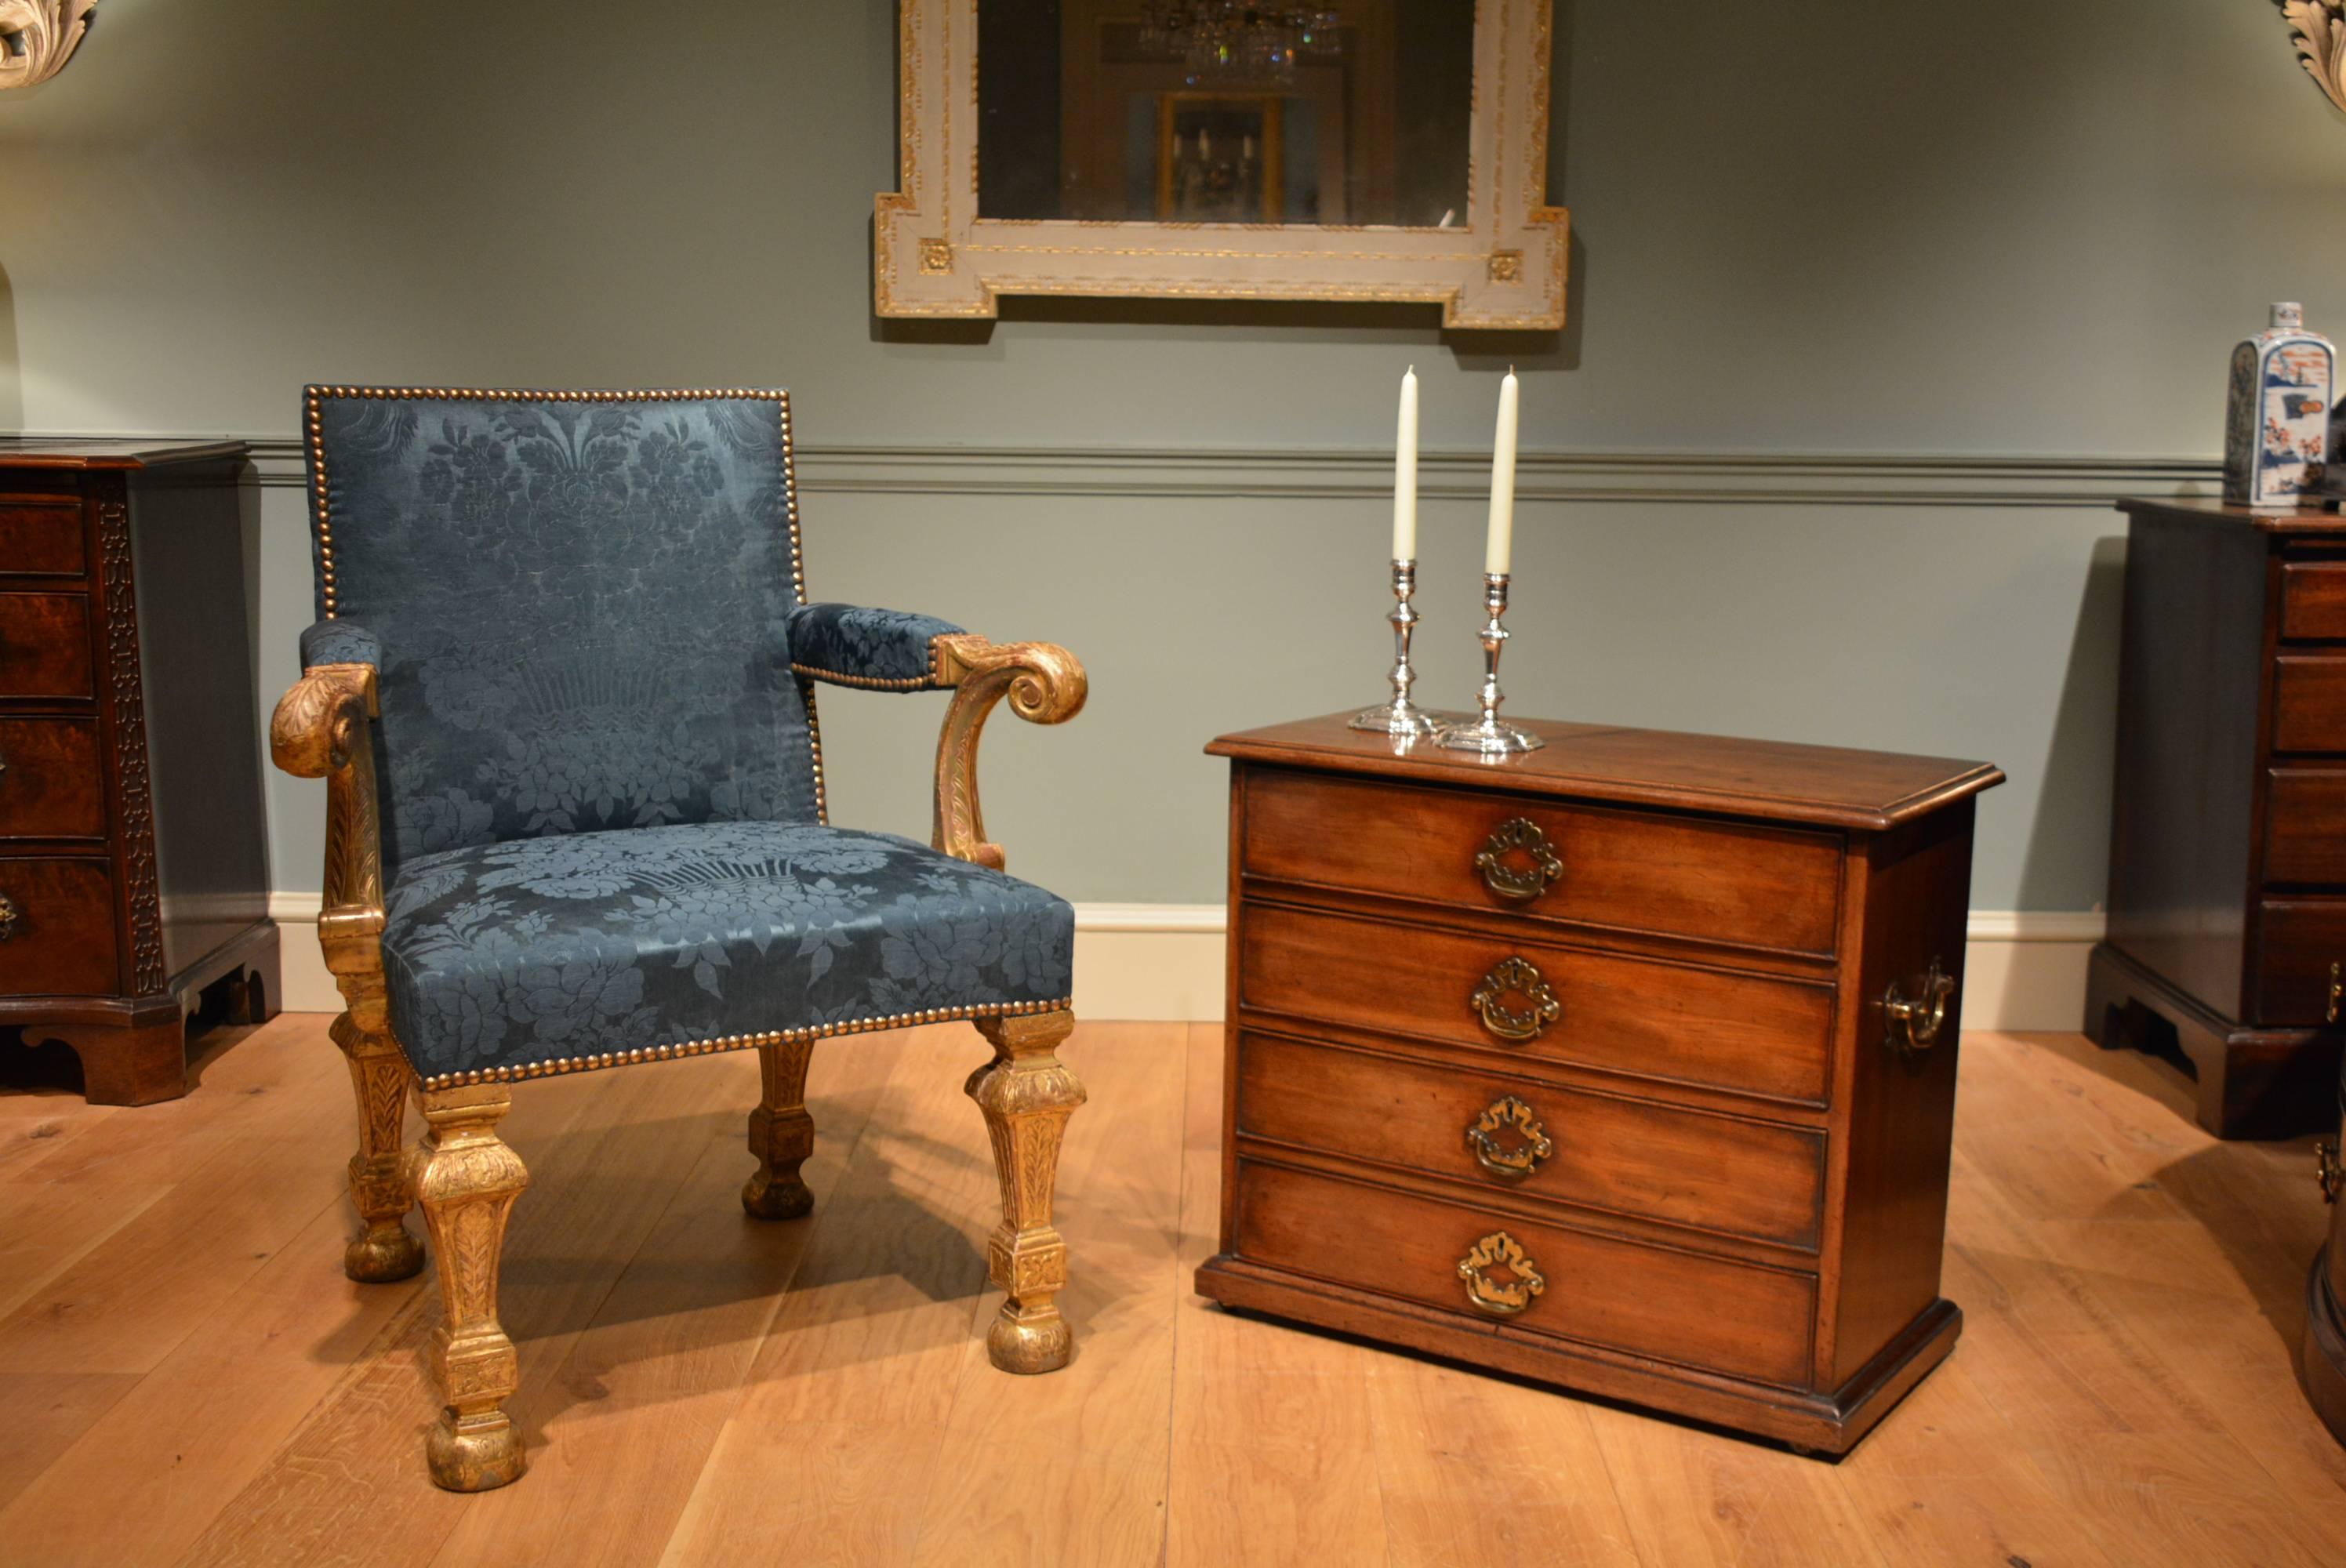 A George II small freestanding mahogany chest containing four drawers, each with its original handle, standing on a shallow plinth base which conceals castors.